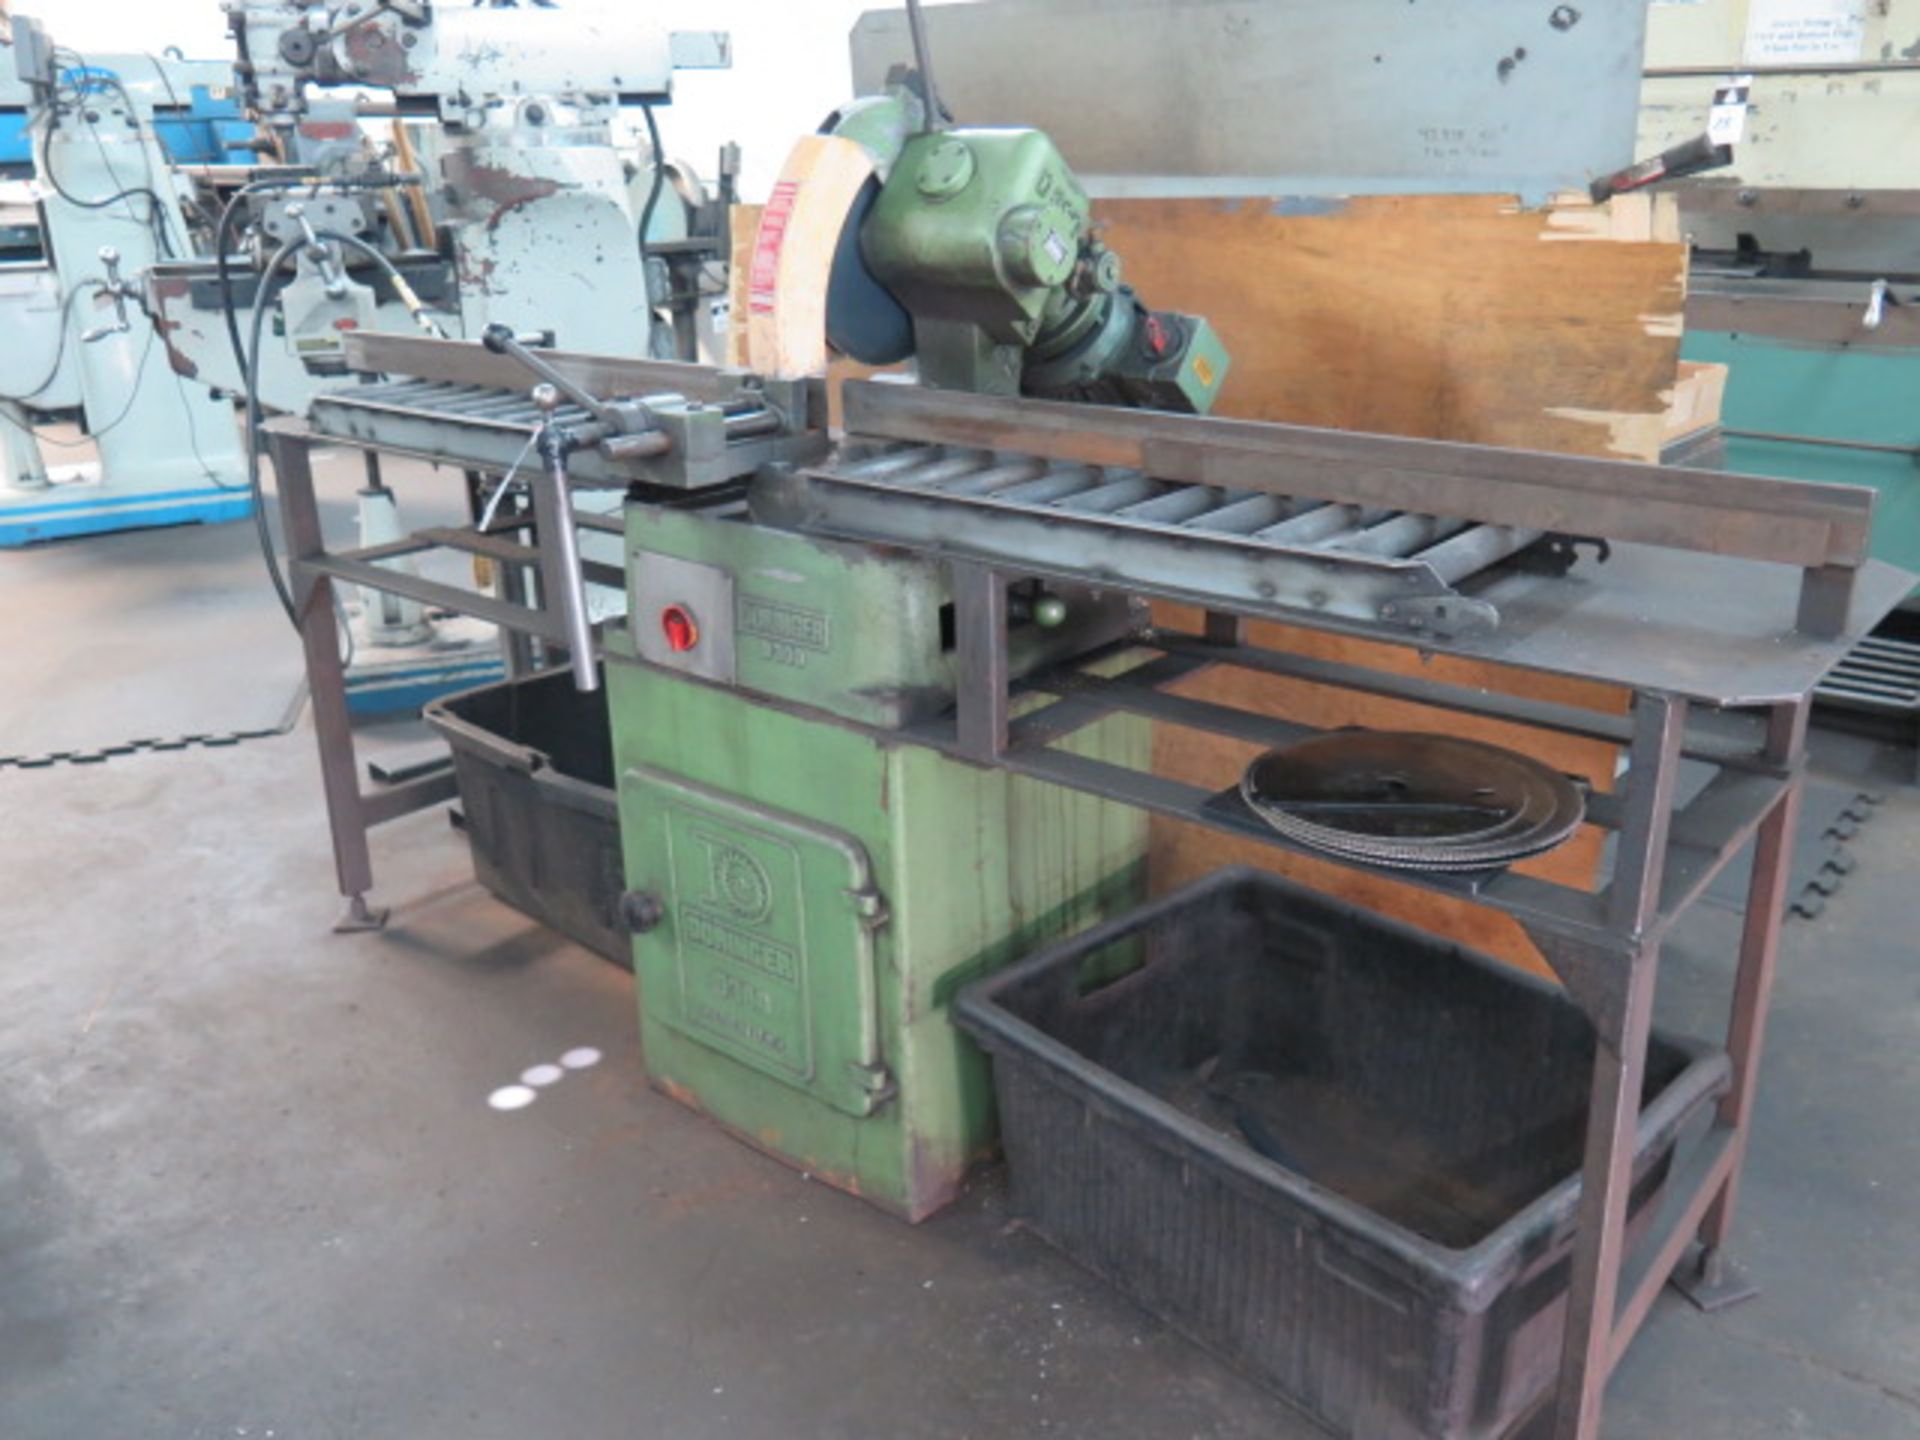 Doringer D-300 Miter Cold Saw s/n 18417 w/ 2-Speeds, Speed Clamping, Extended Table, SOLD AS IS - Image 2 of 16